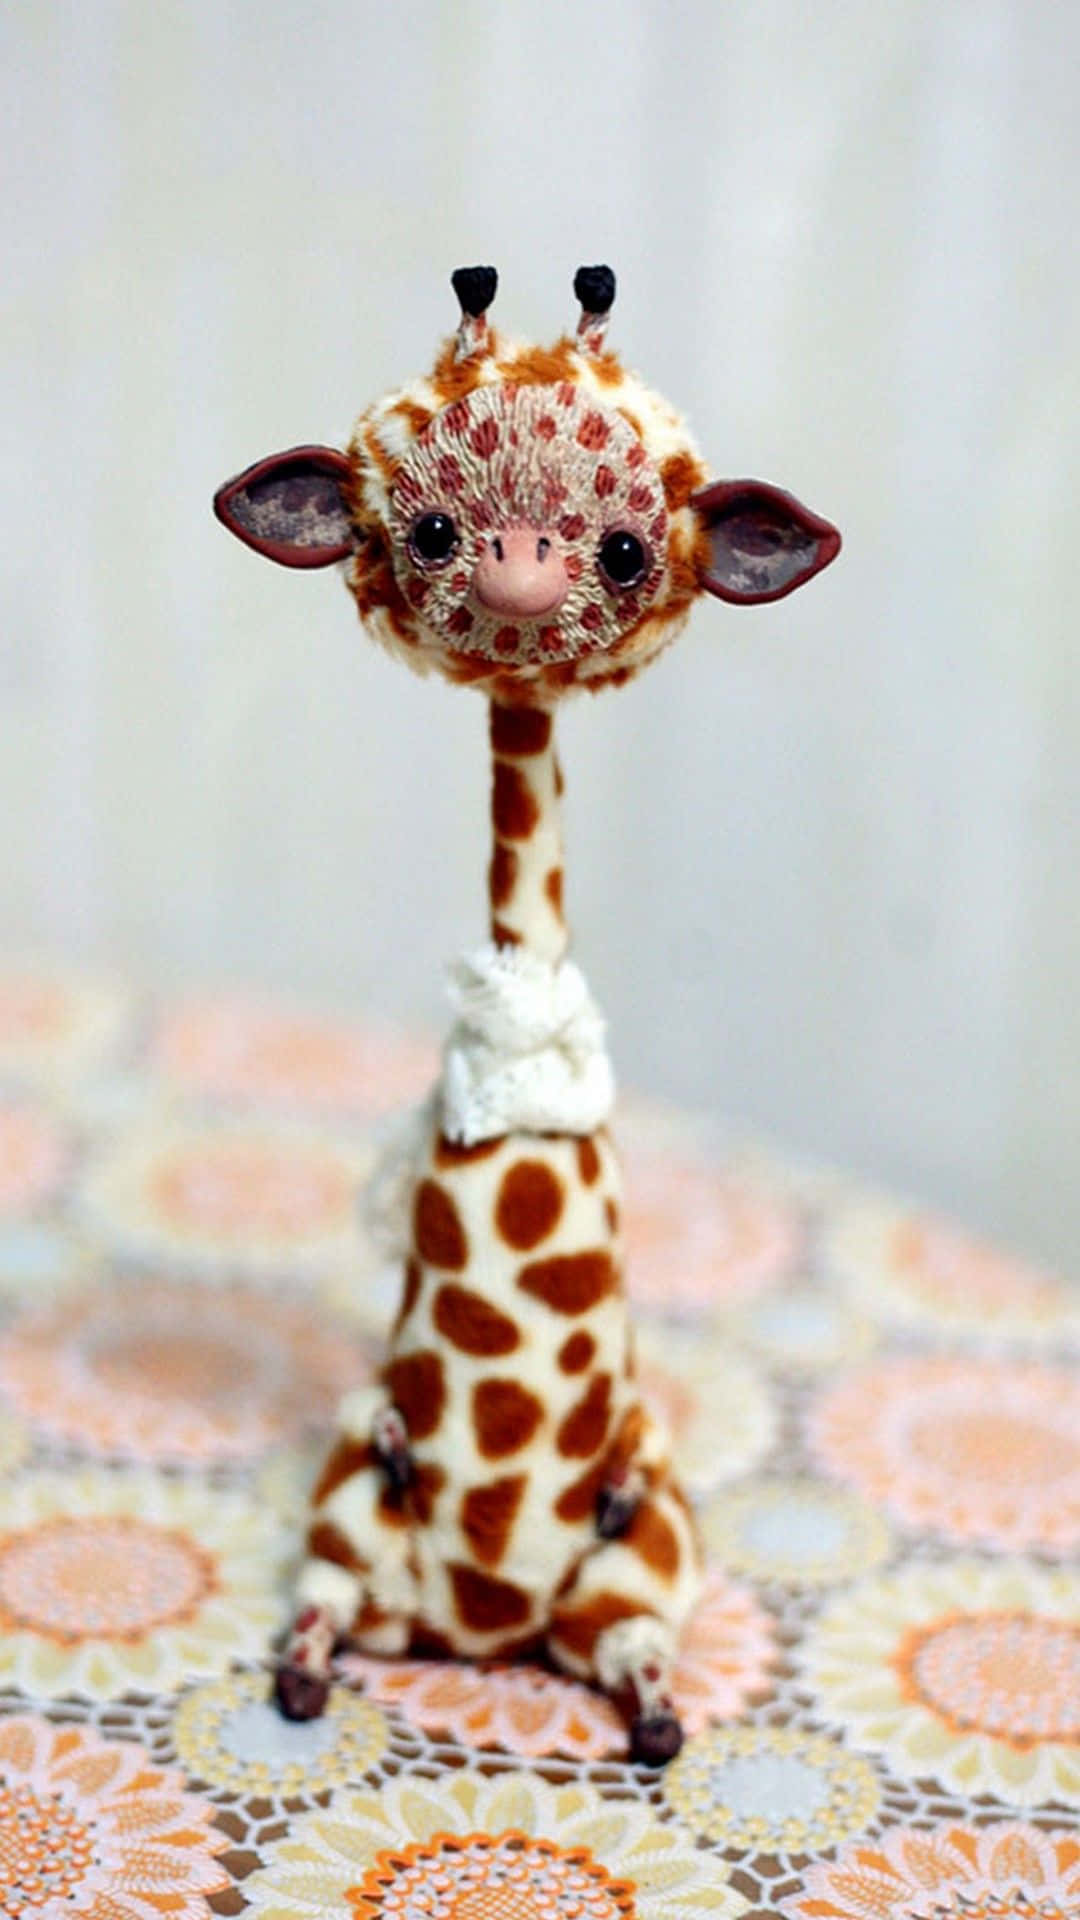 "This Funny Giraffe is Just Too Much!" Wallpaper